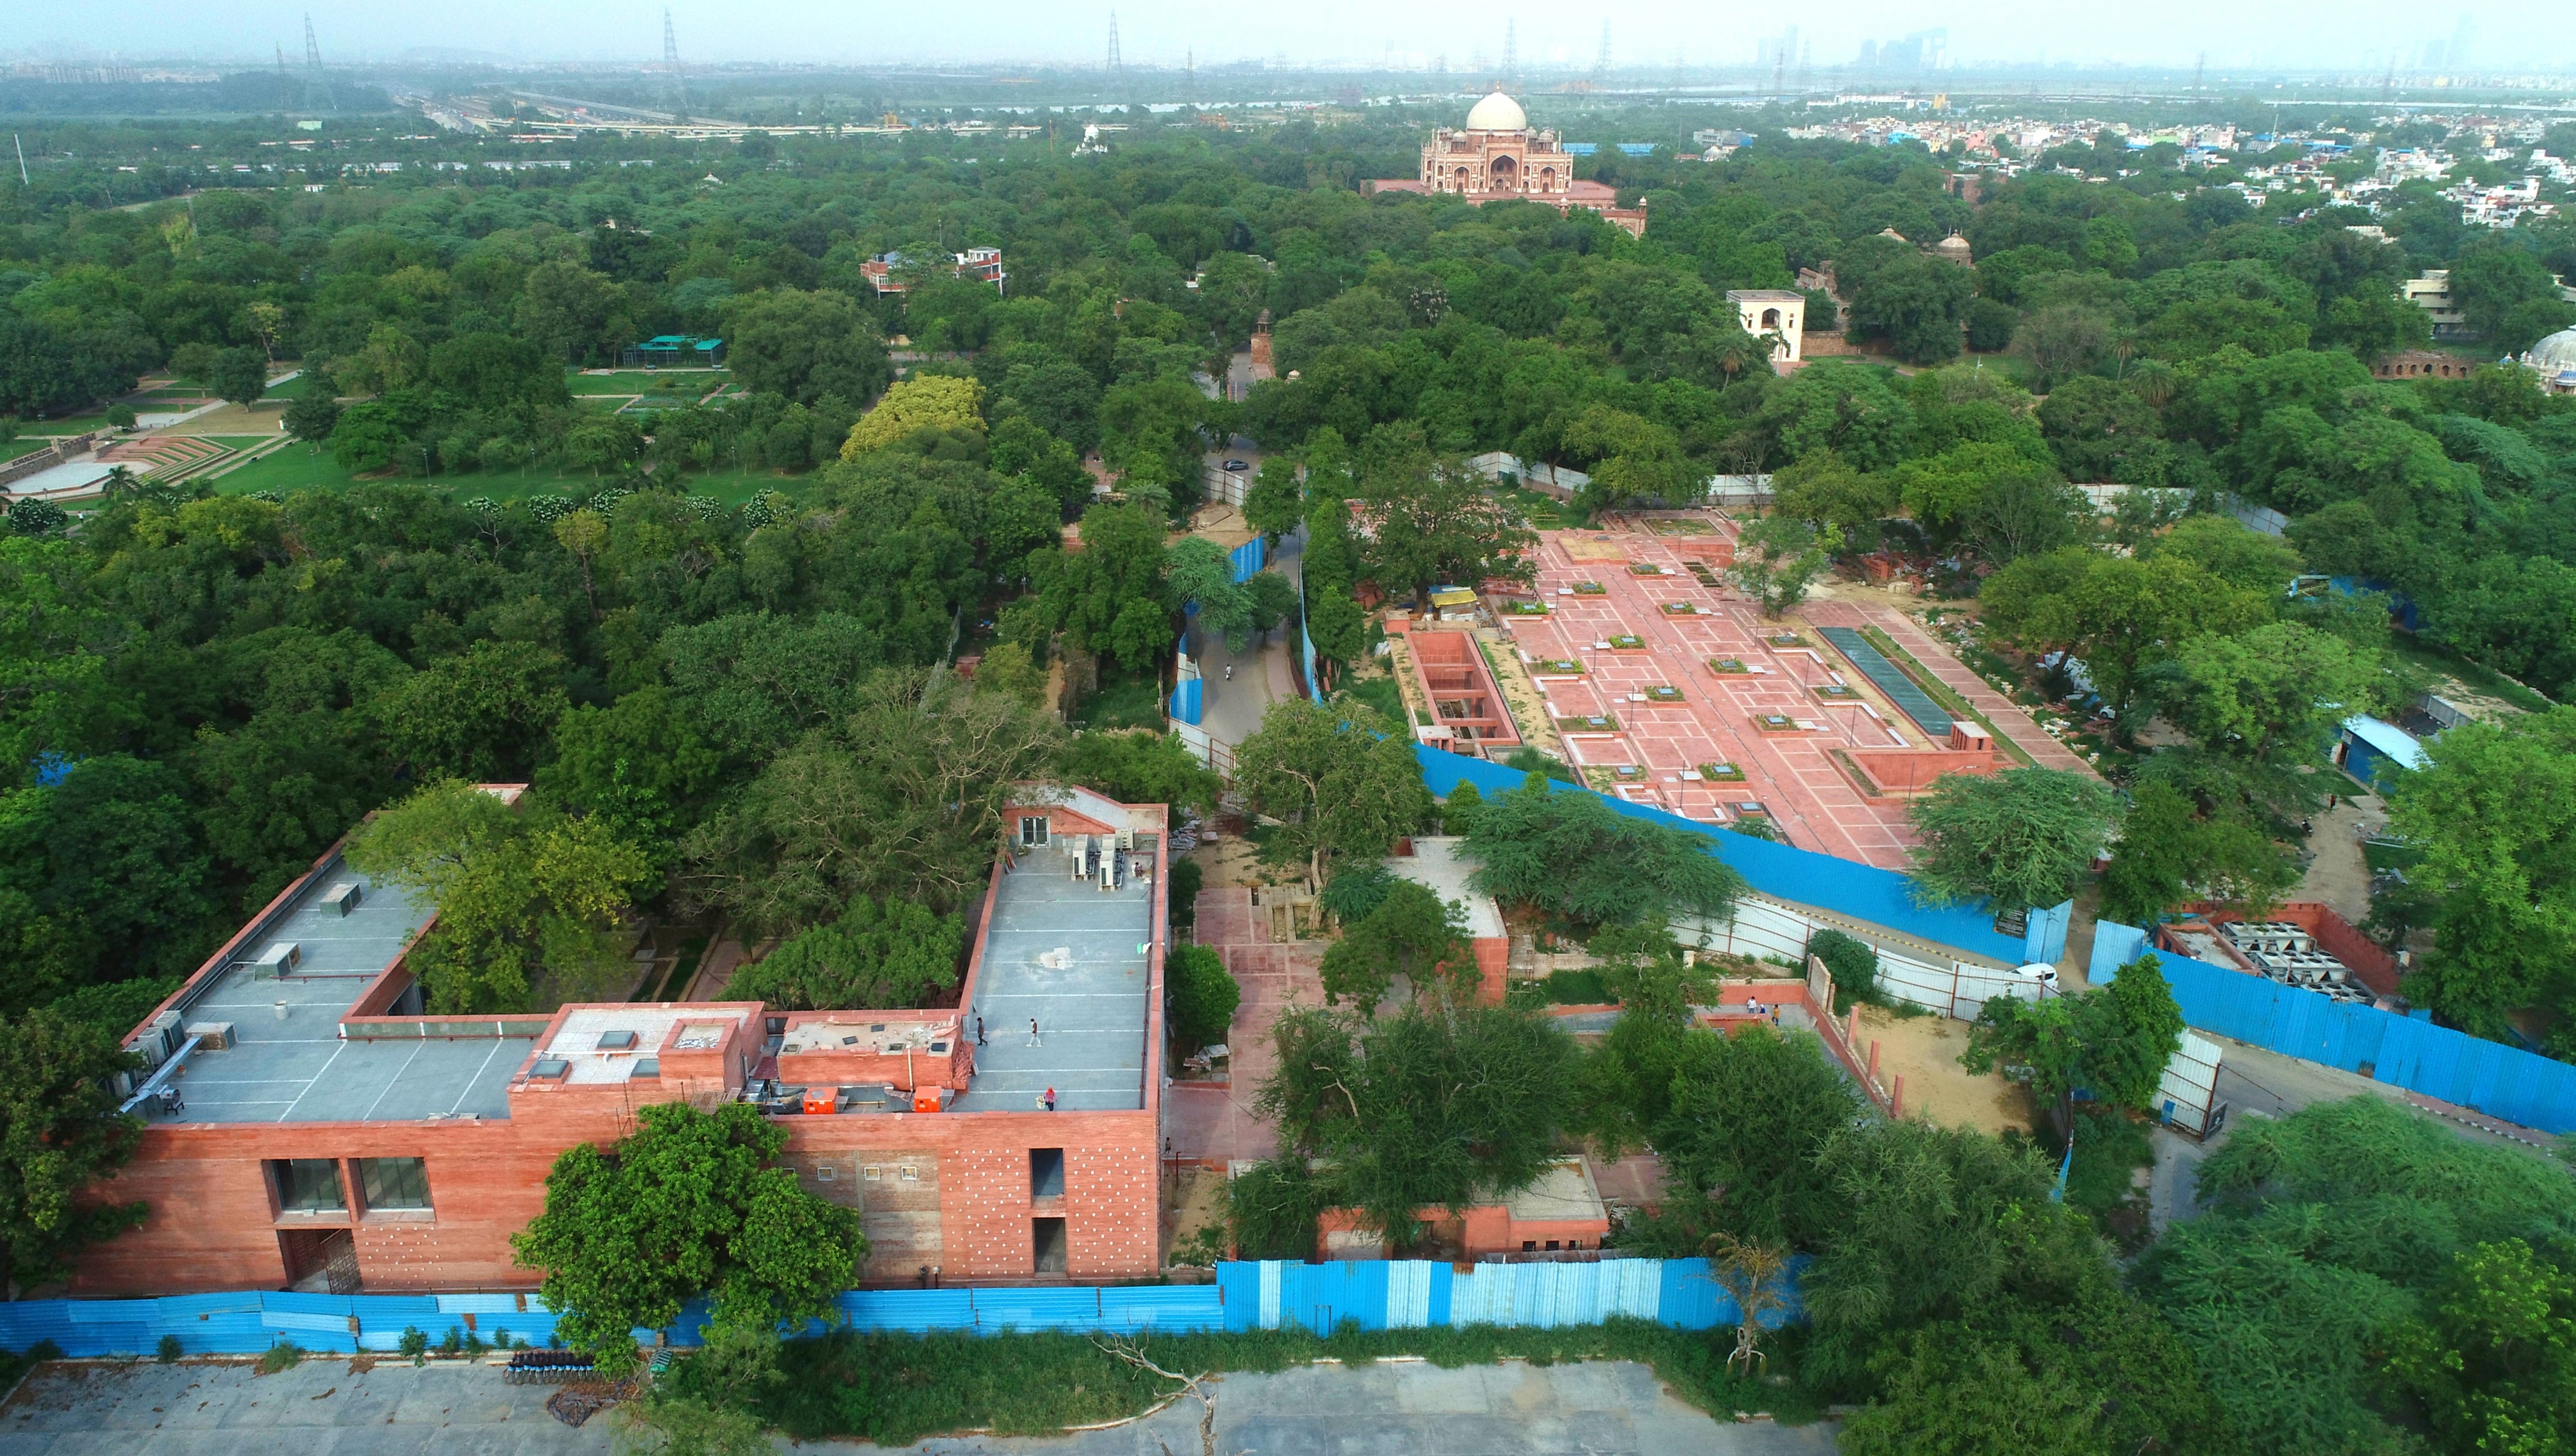 <p>Aerial view over the Site Museum showing Humayun's Tomb in the background and the administration block in the foreground</p>